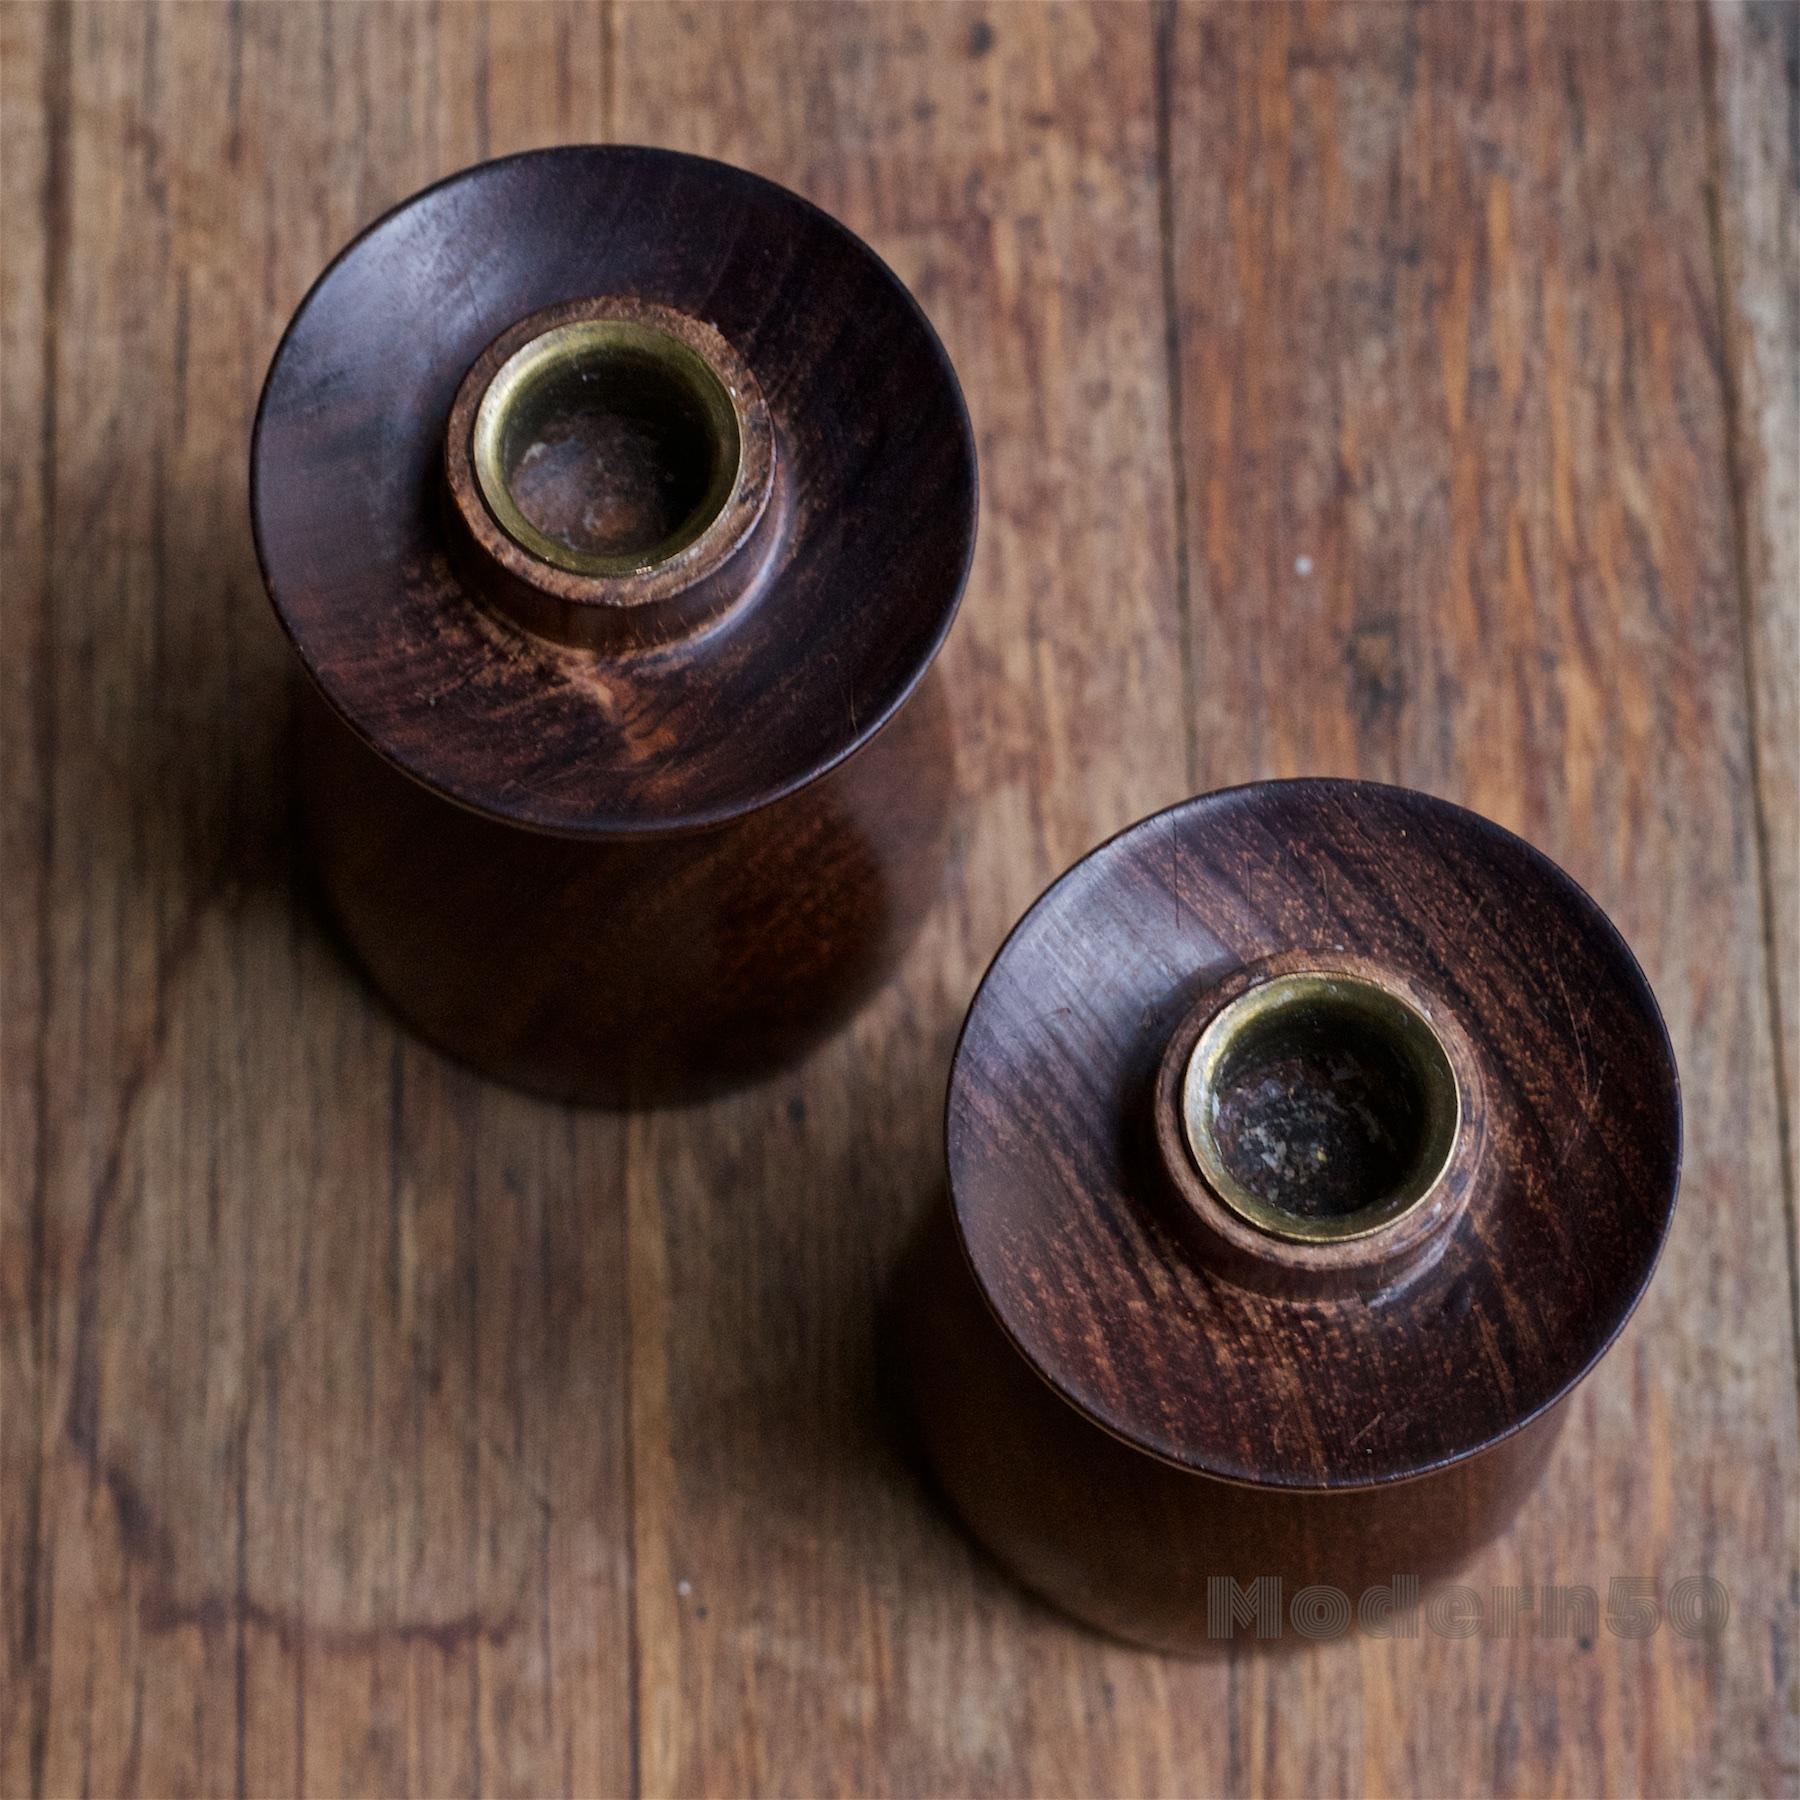 Modernist South American Rosewood Candlesticks Hourglass Studio Craft Woodwork In Good Condition For Sale In Hyattsville, MD